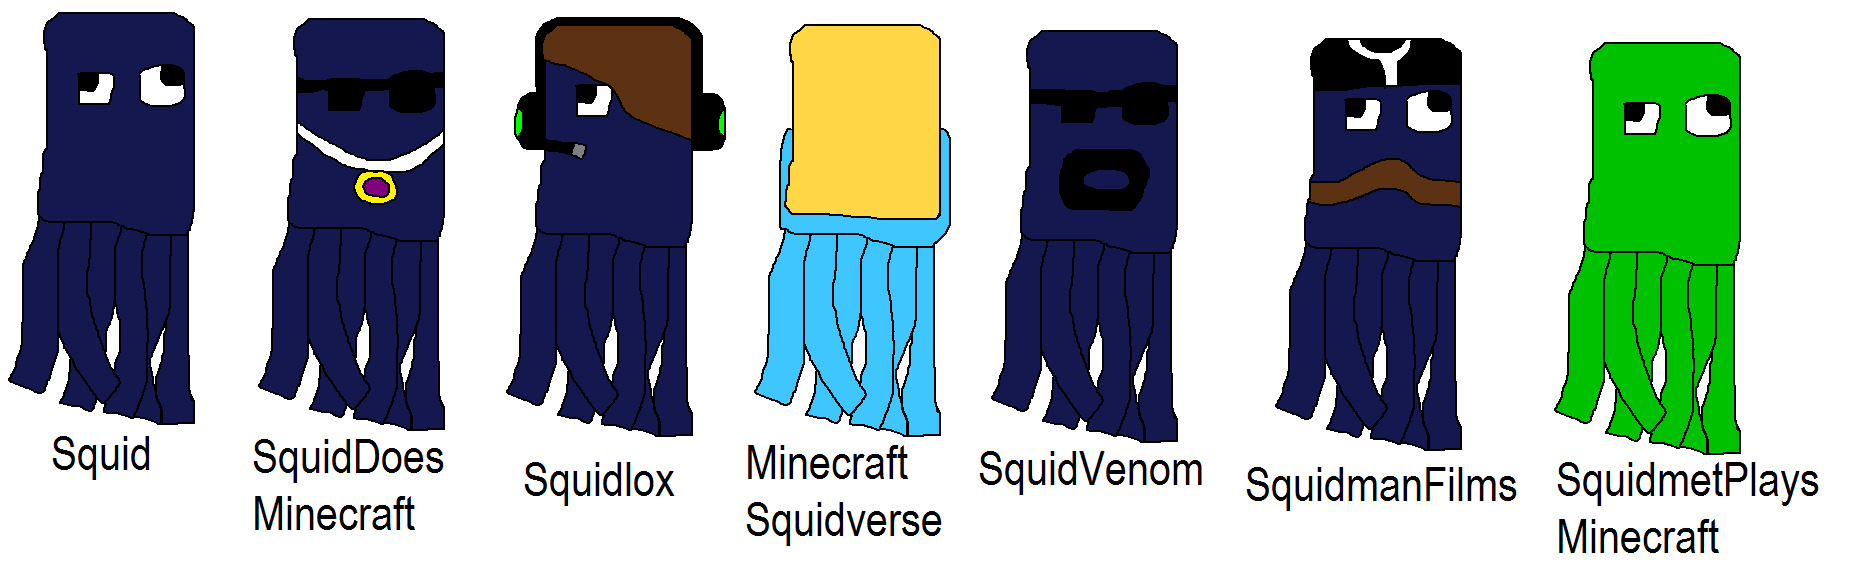 Minecraft Squidtubers by clockworkMelody on